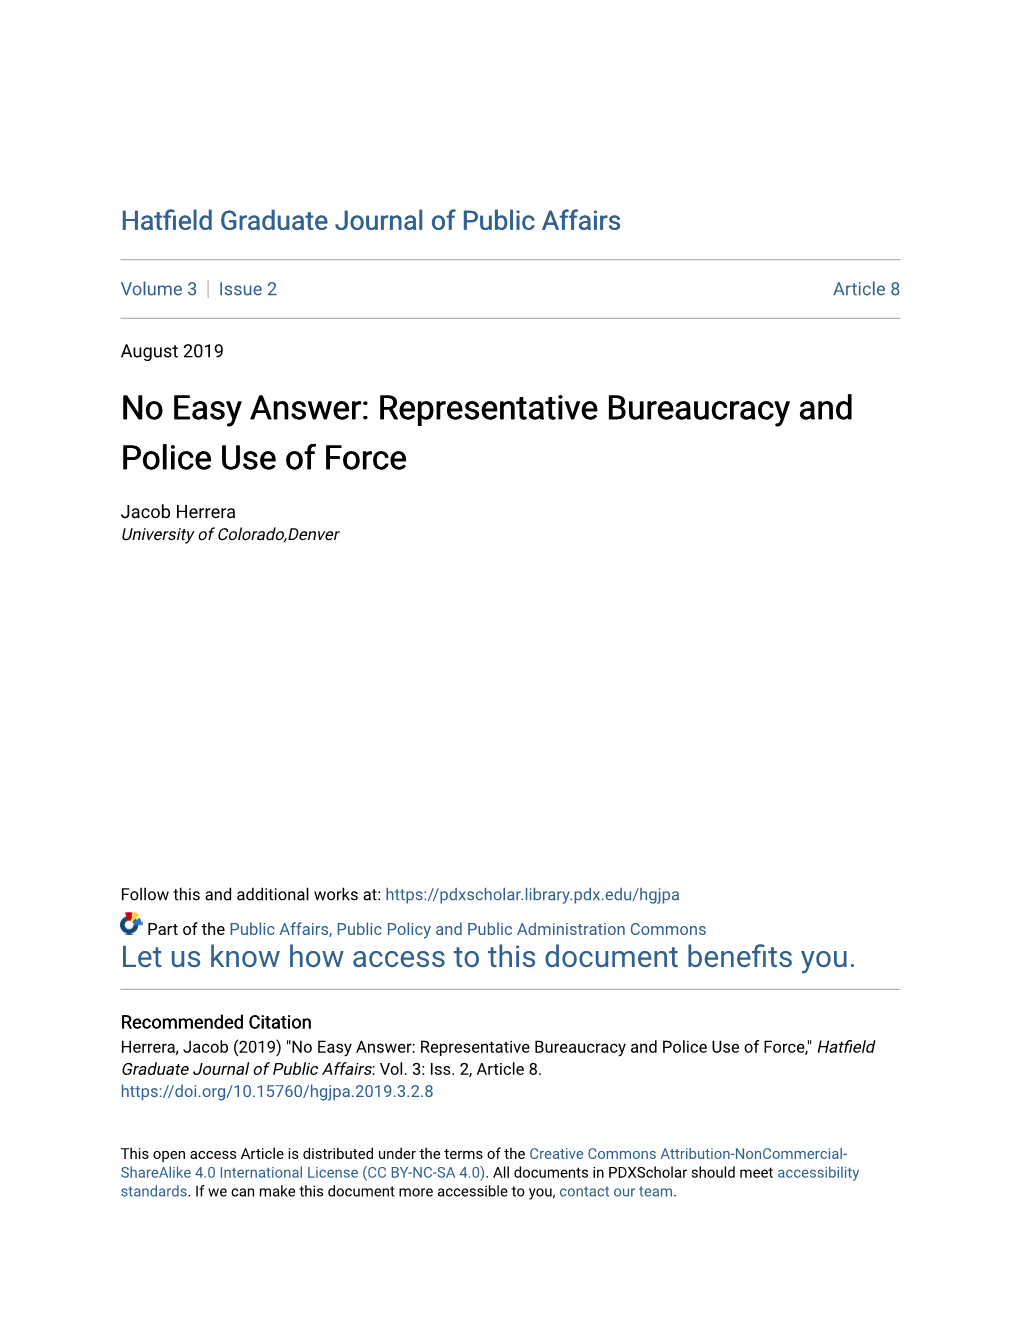 Representative Bureaucracy and Police Use of Force